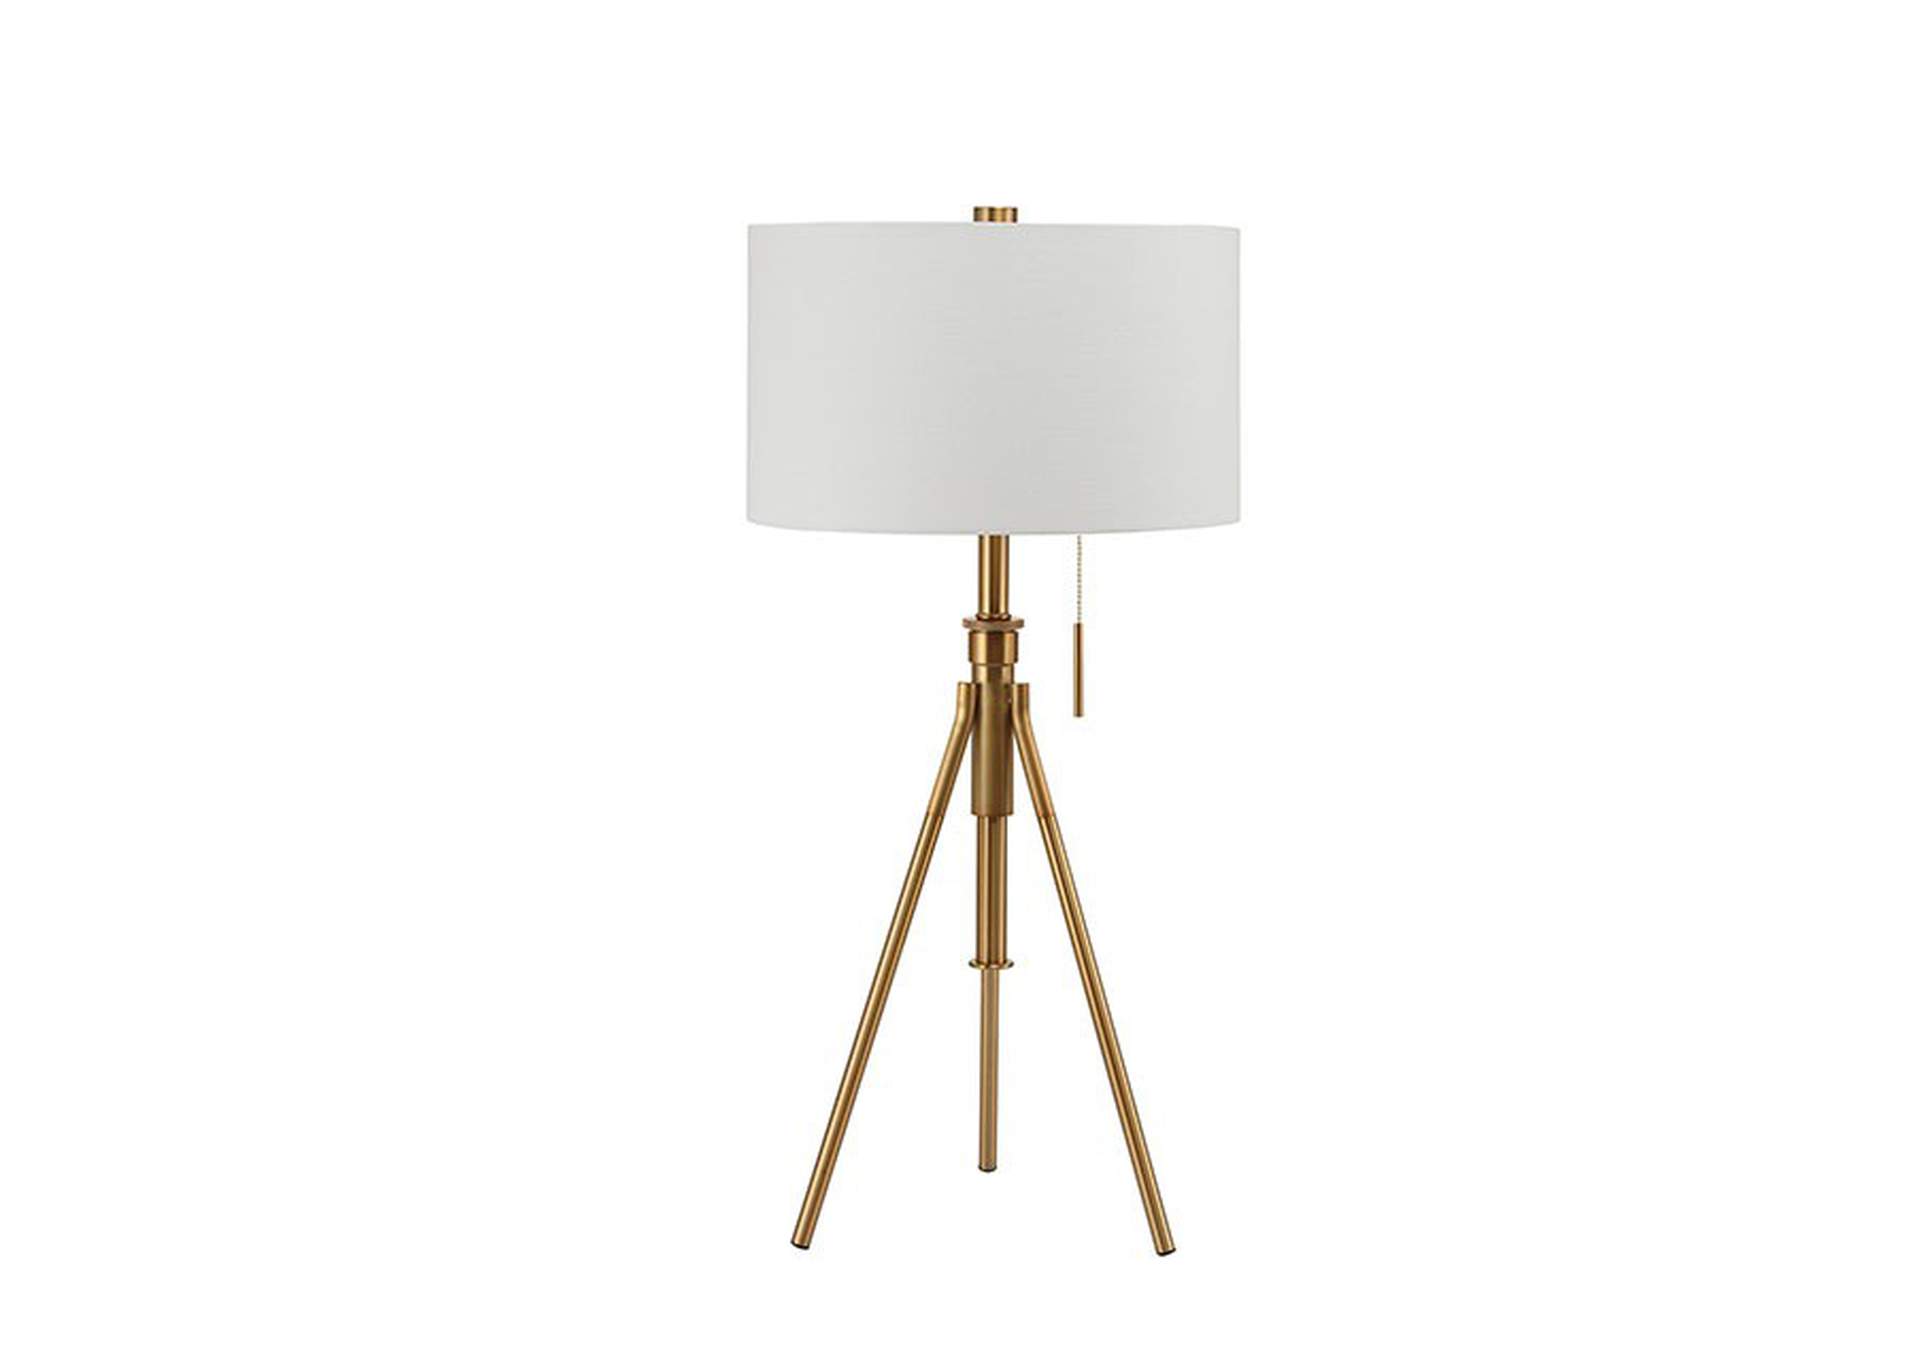 Zaya Stained Gold Table Lamp Best, Lamp That Looks Like Legs